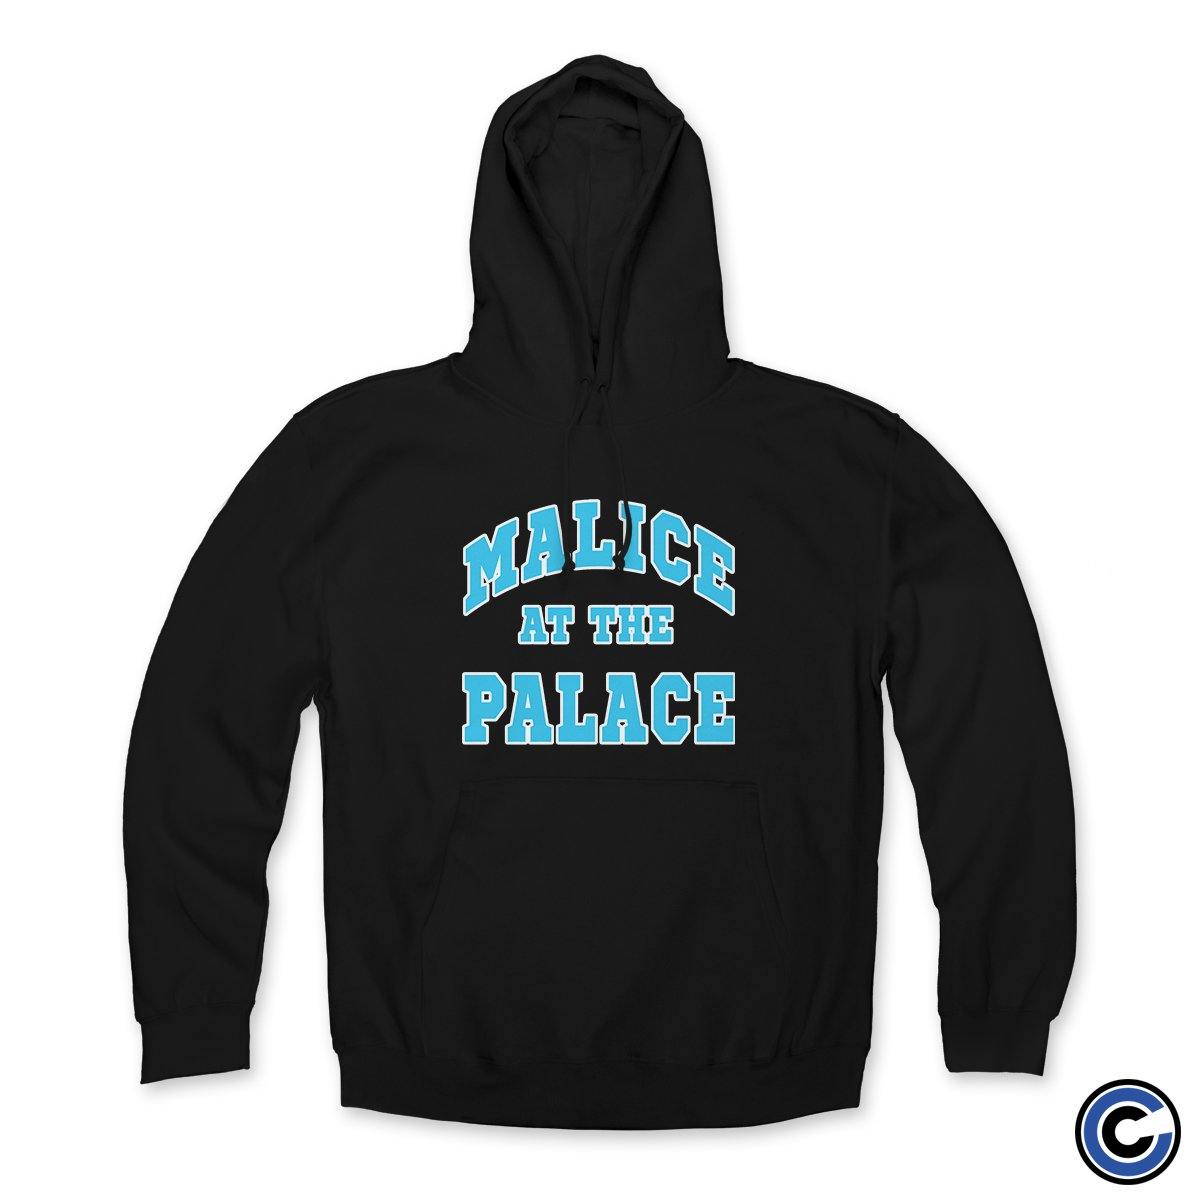 Buy – Malice at the Palace "Collegiate" Hoodie – Band & Music Merch – Cold Cuts Merch